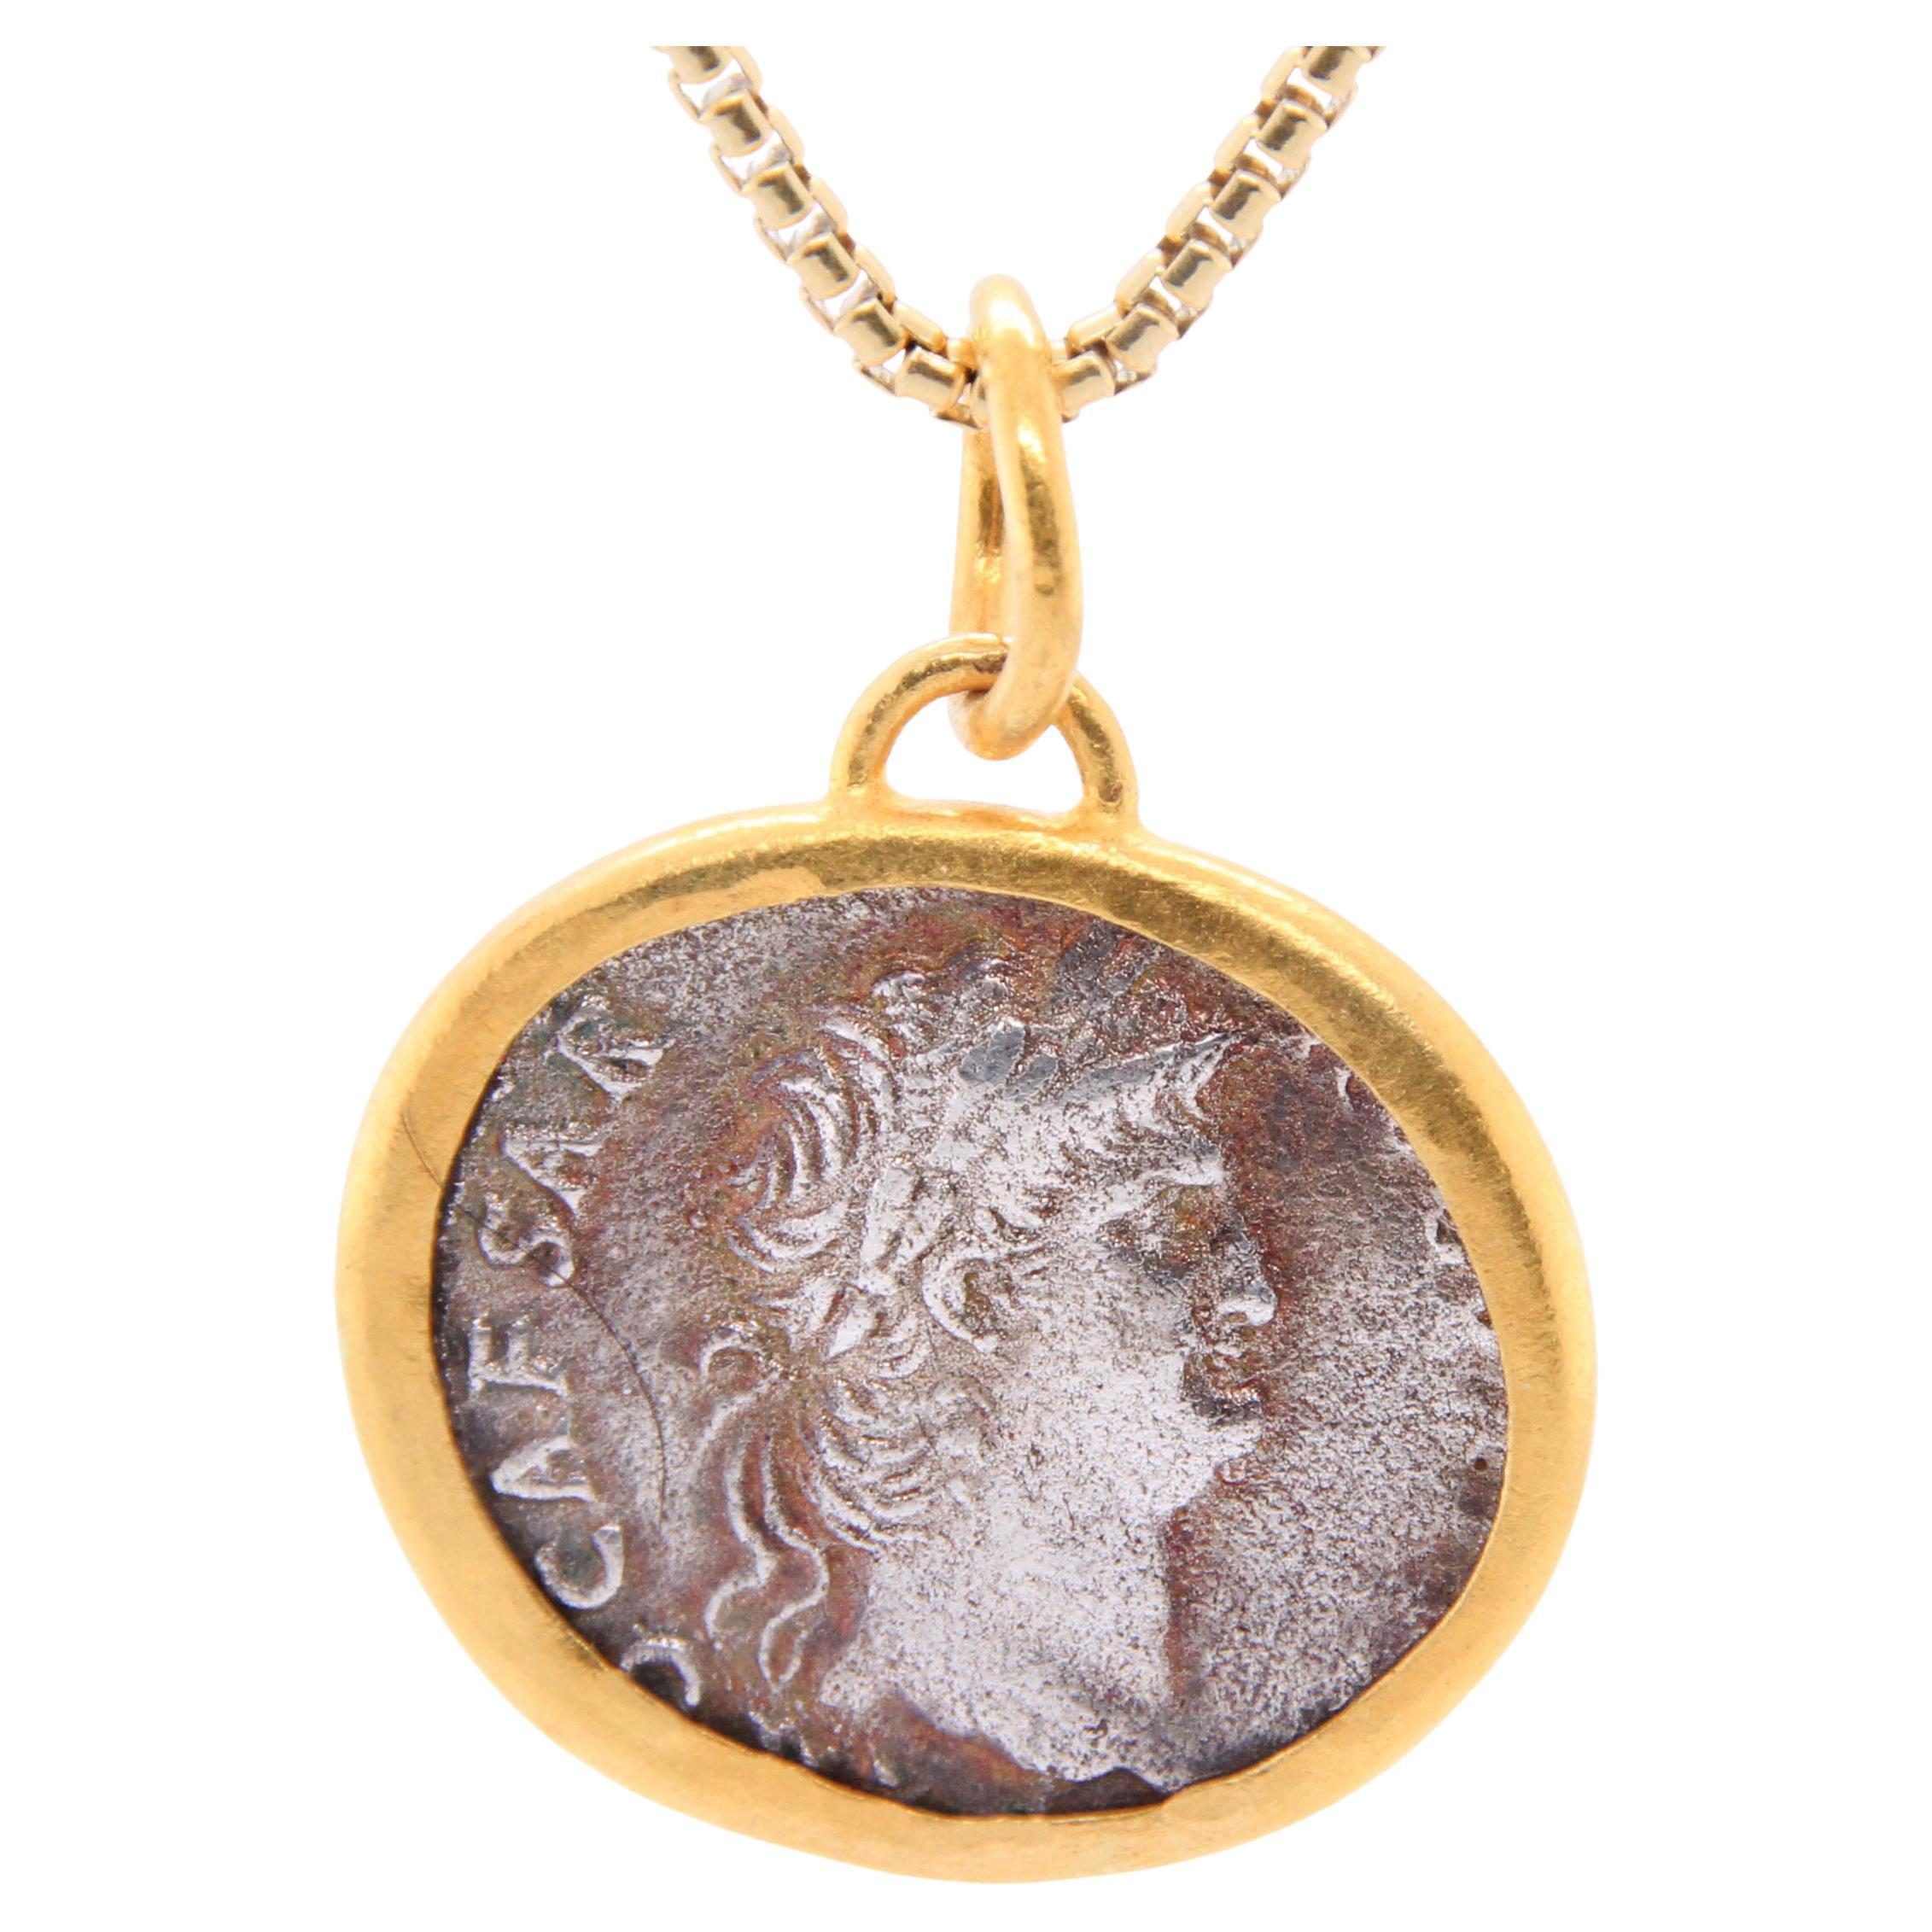 Julius Caeser Coin Replica Pendant, 24K and Silver, Handmade by Prehistoric Works of Istanbul, Turkey. Pendant Details: Coin Replica, Width - 3/8”, Two-sided pendant, 24K Gold Bezel -1.10 grams, Sterling S925 - 2.20 grams. Pendant comes with a 16